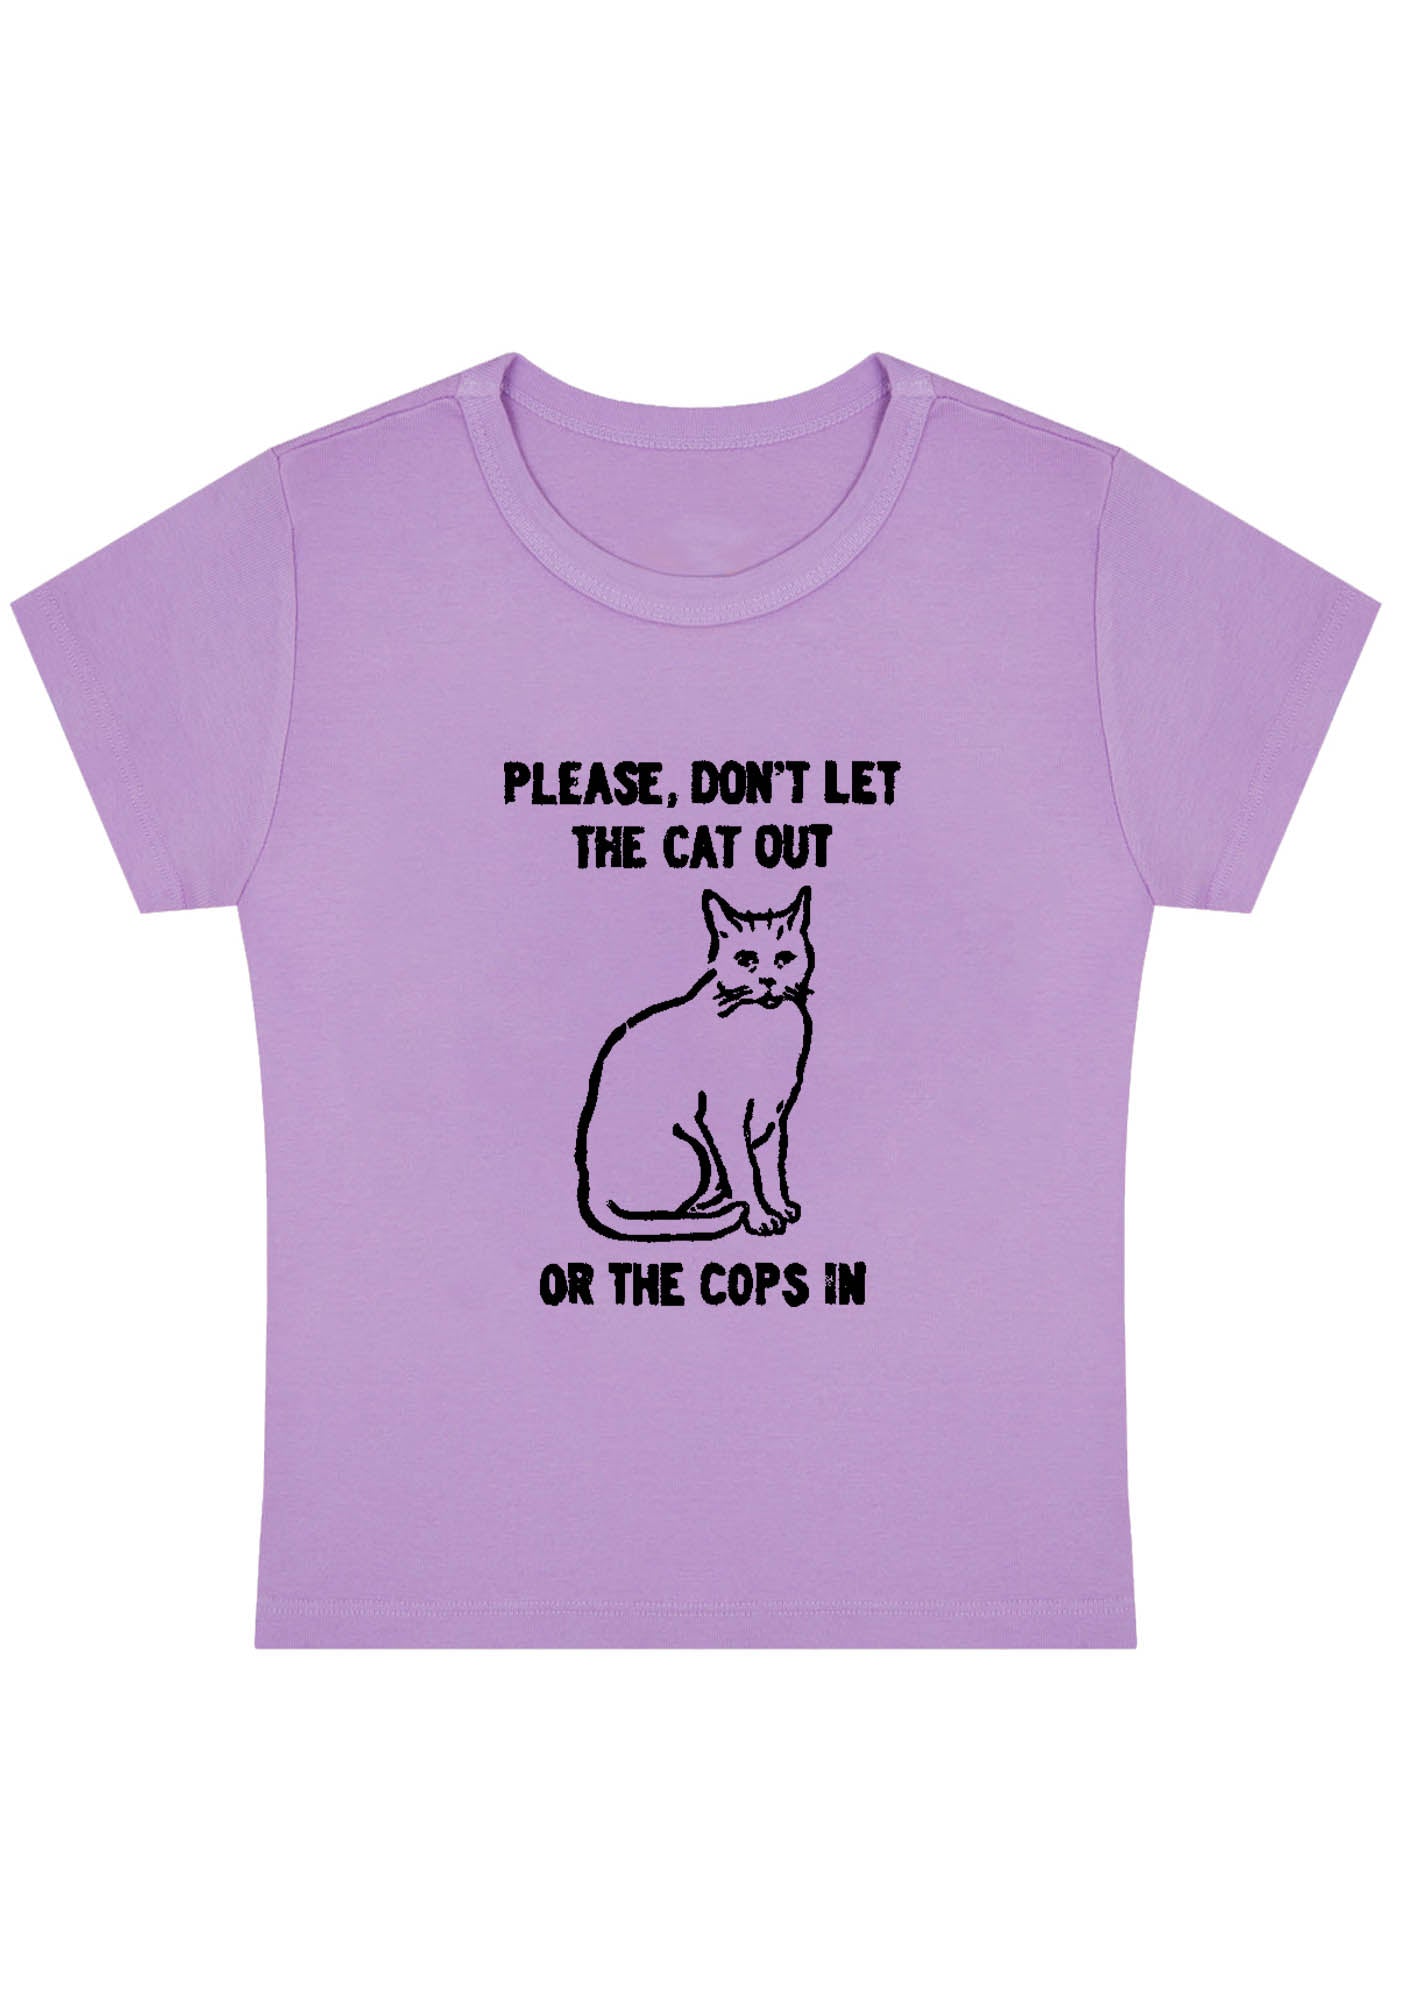 Don't Let The Cat Out Y2K Baby Tee